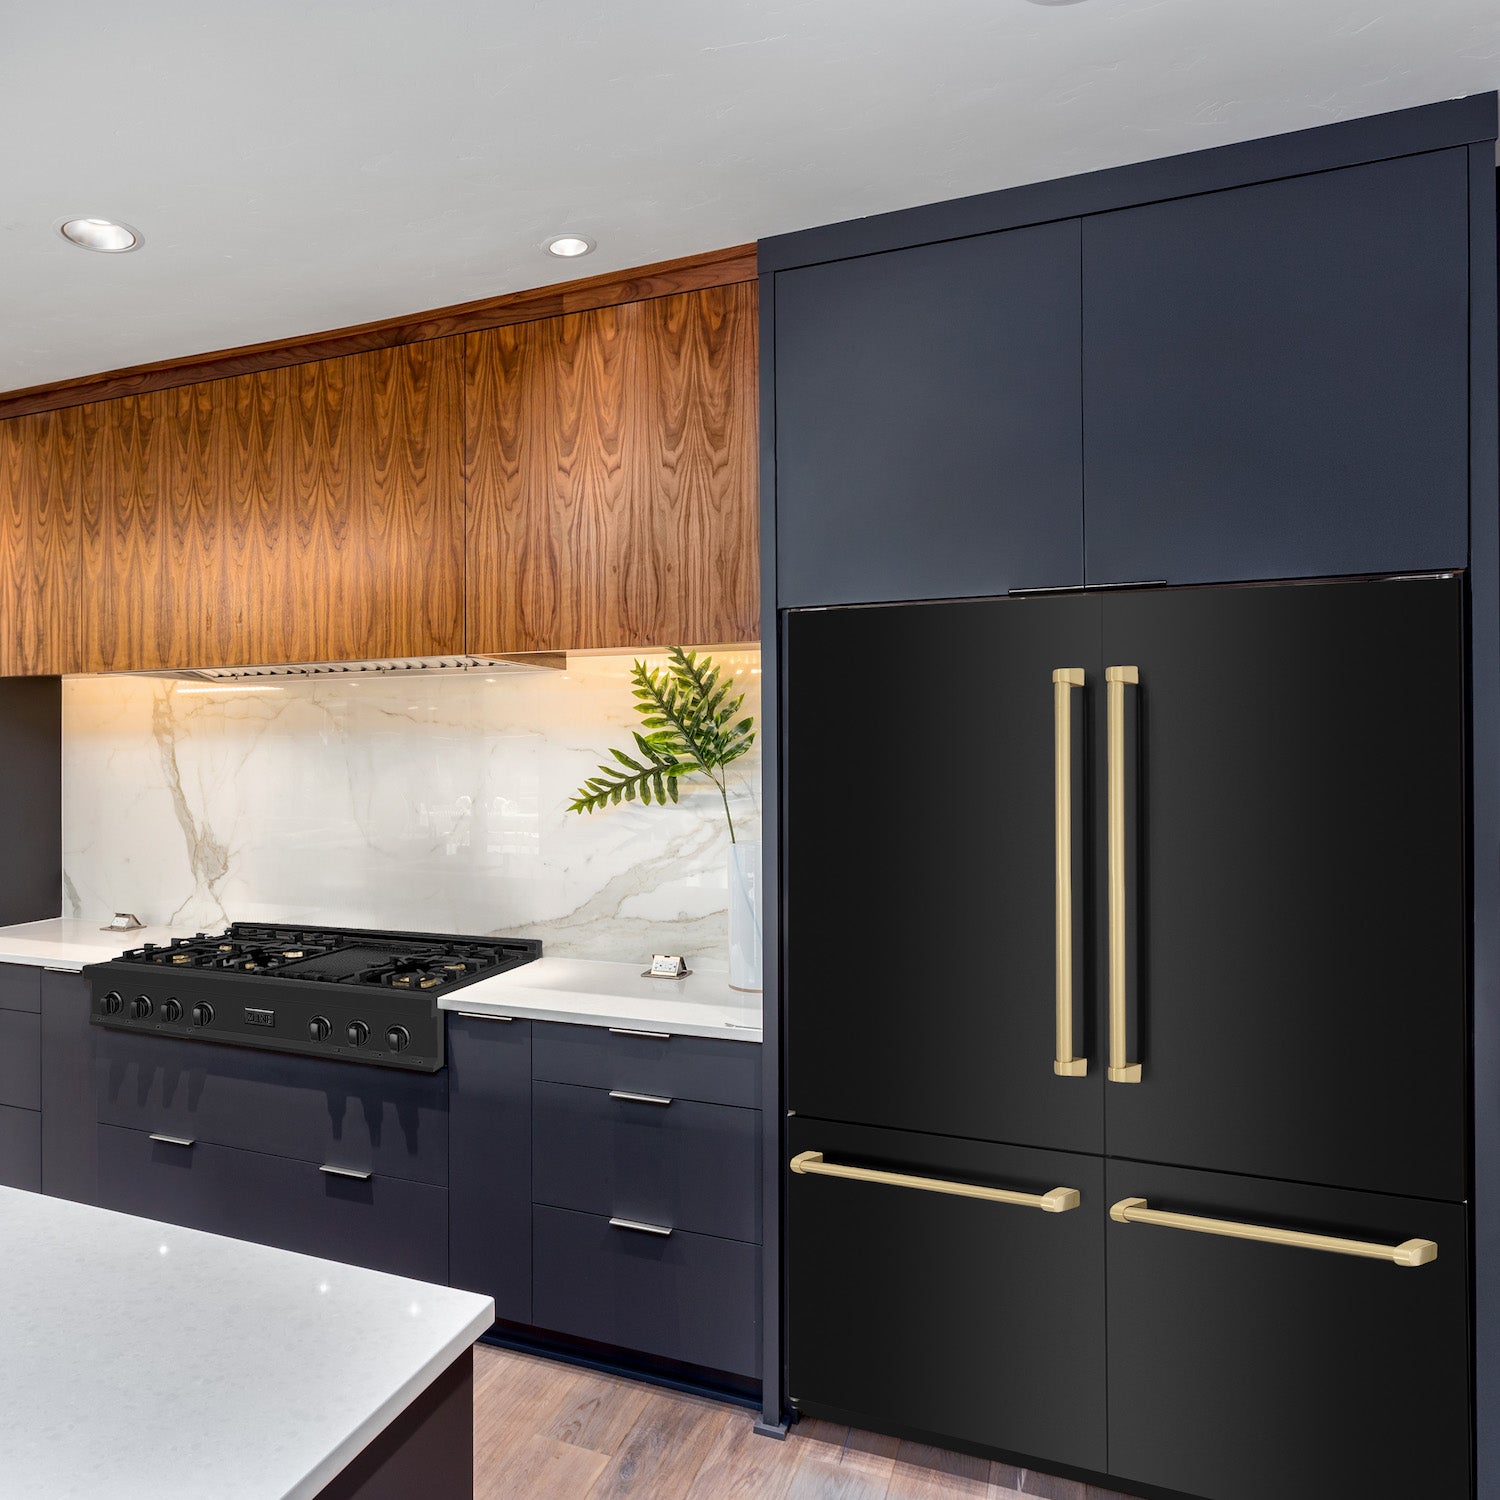 ZLINE Autograph Edition Built-in Refrigerator in Black Stainless Steel with Polished Gold Accent Handles in a kitchen.